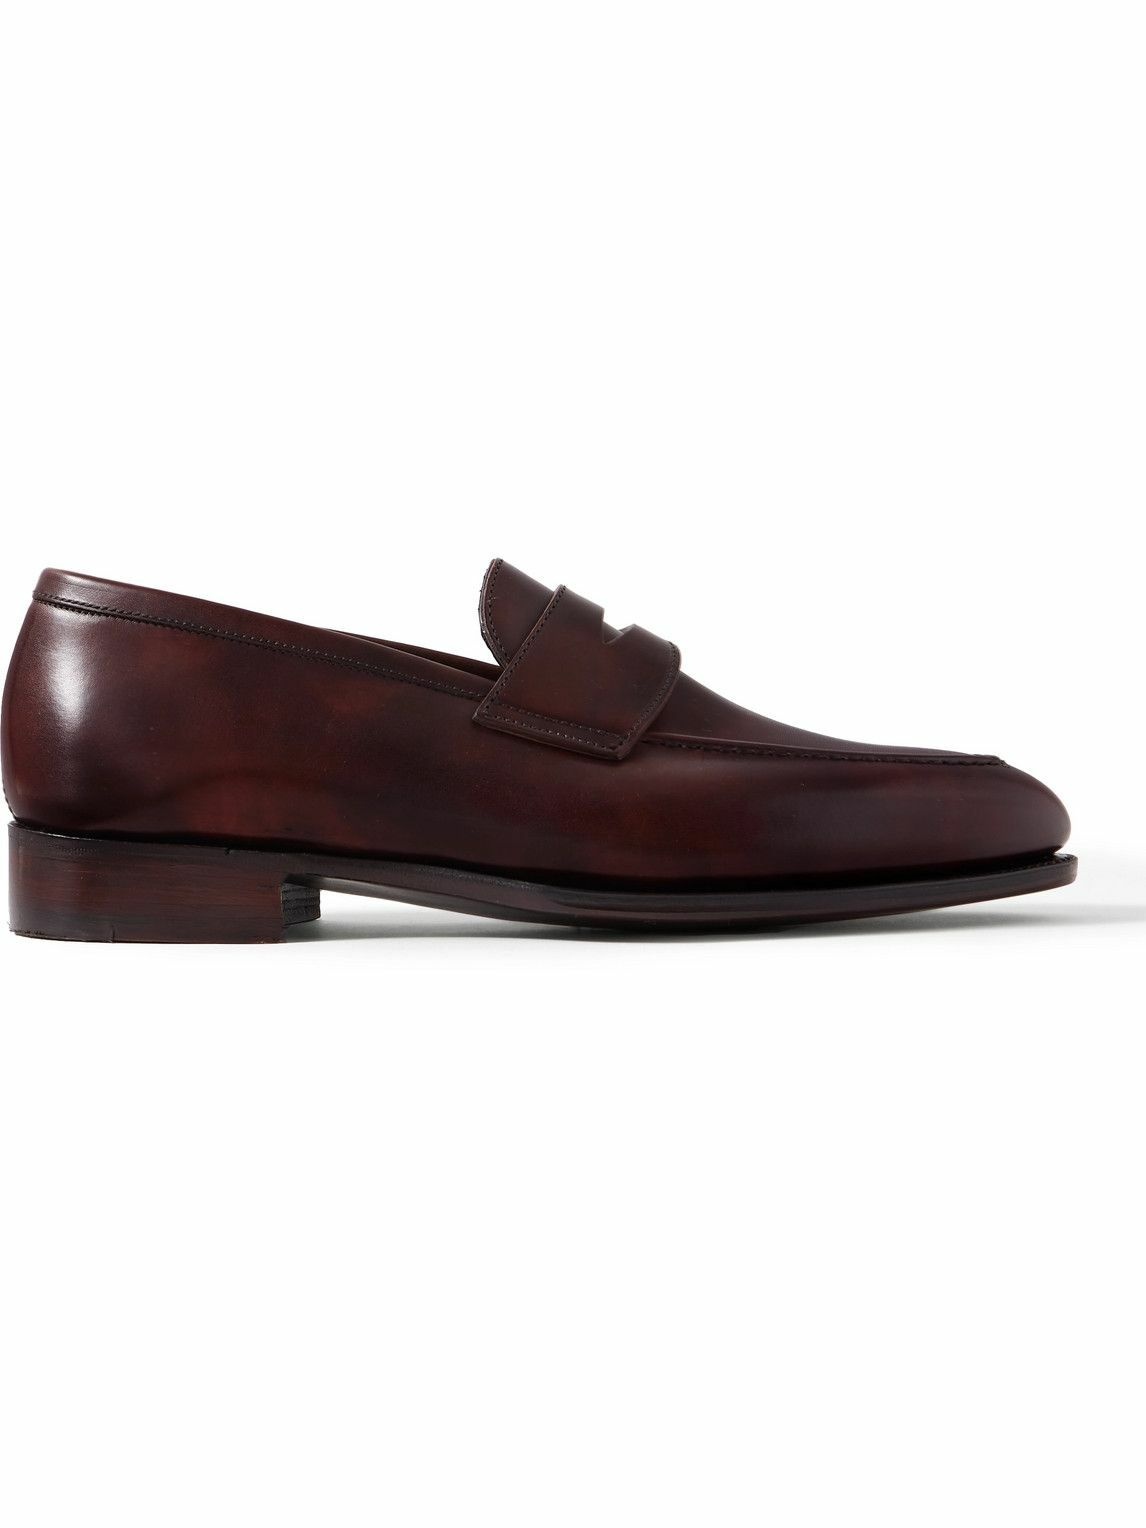 Photo: George Cleverley - Bradley II Leather Penny Loafers - Brown